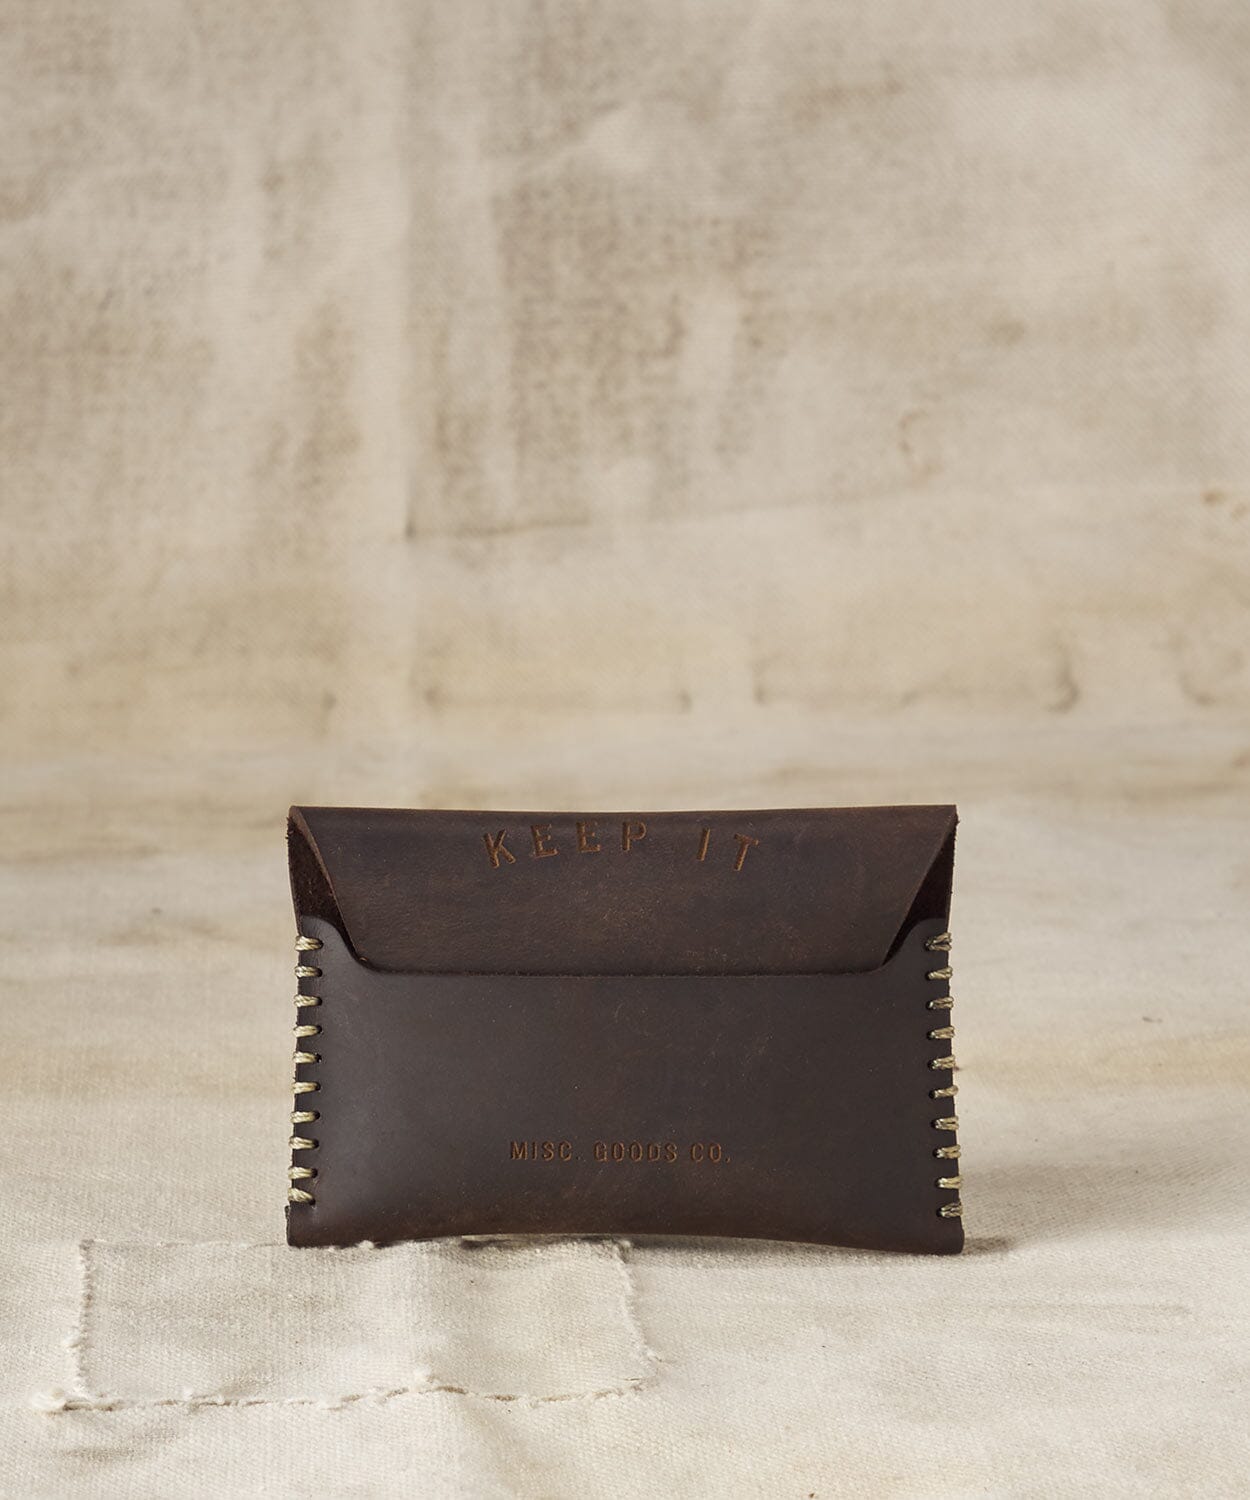 Leather Wallet Accessories Misc. Goods Co. Mocha 